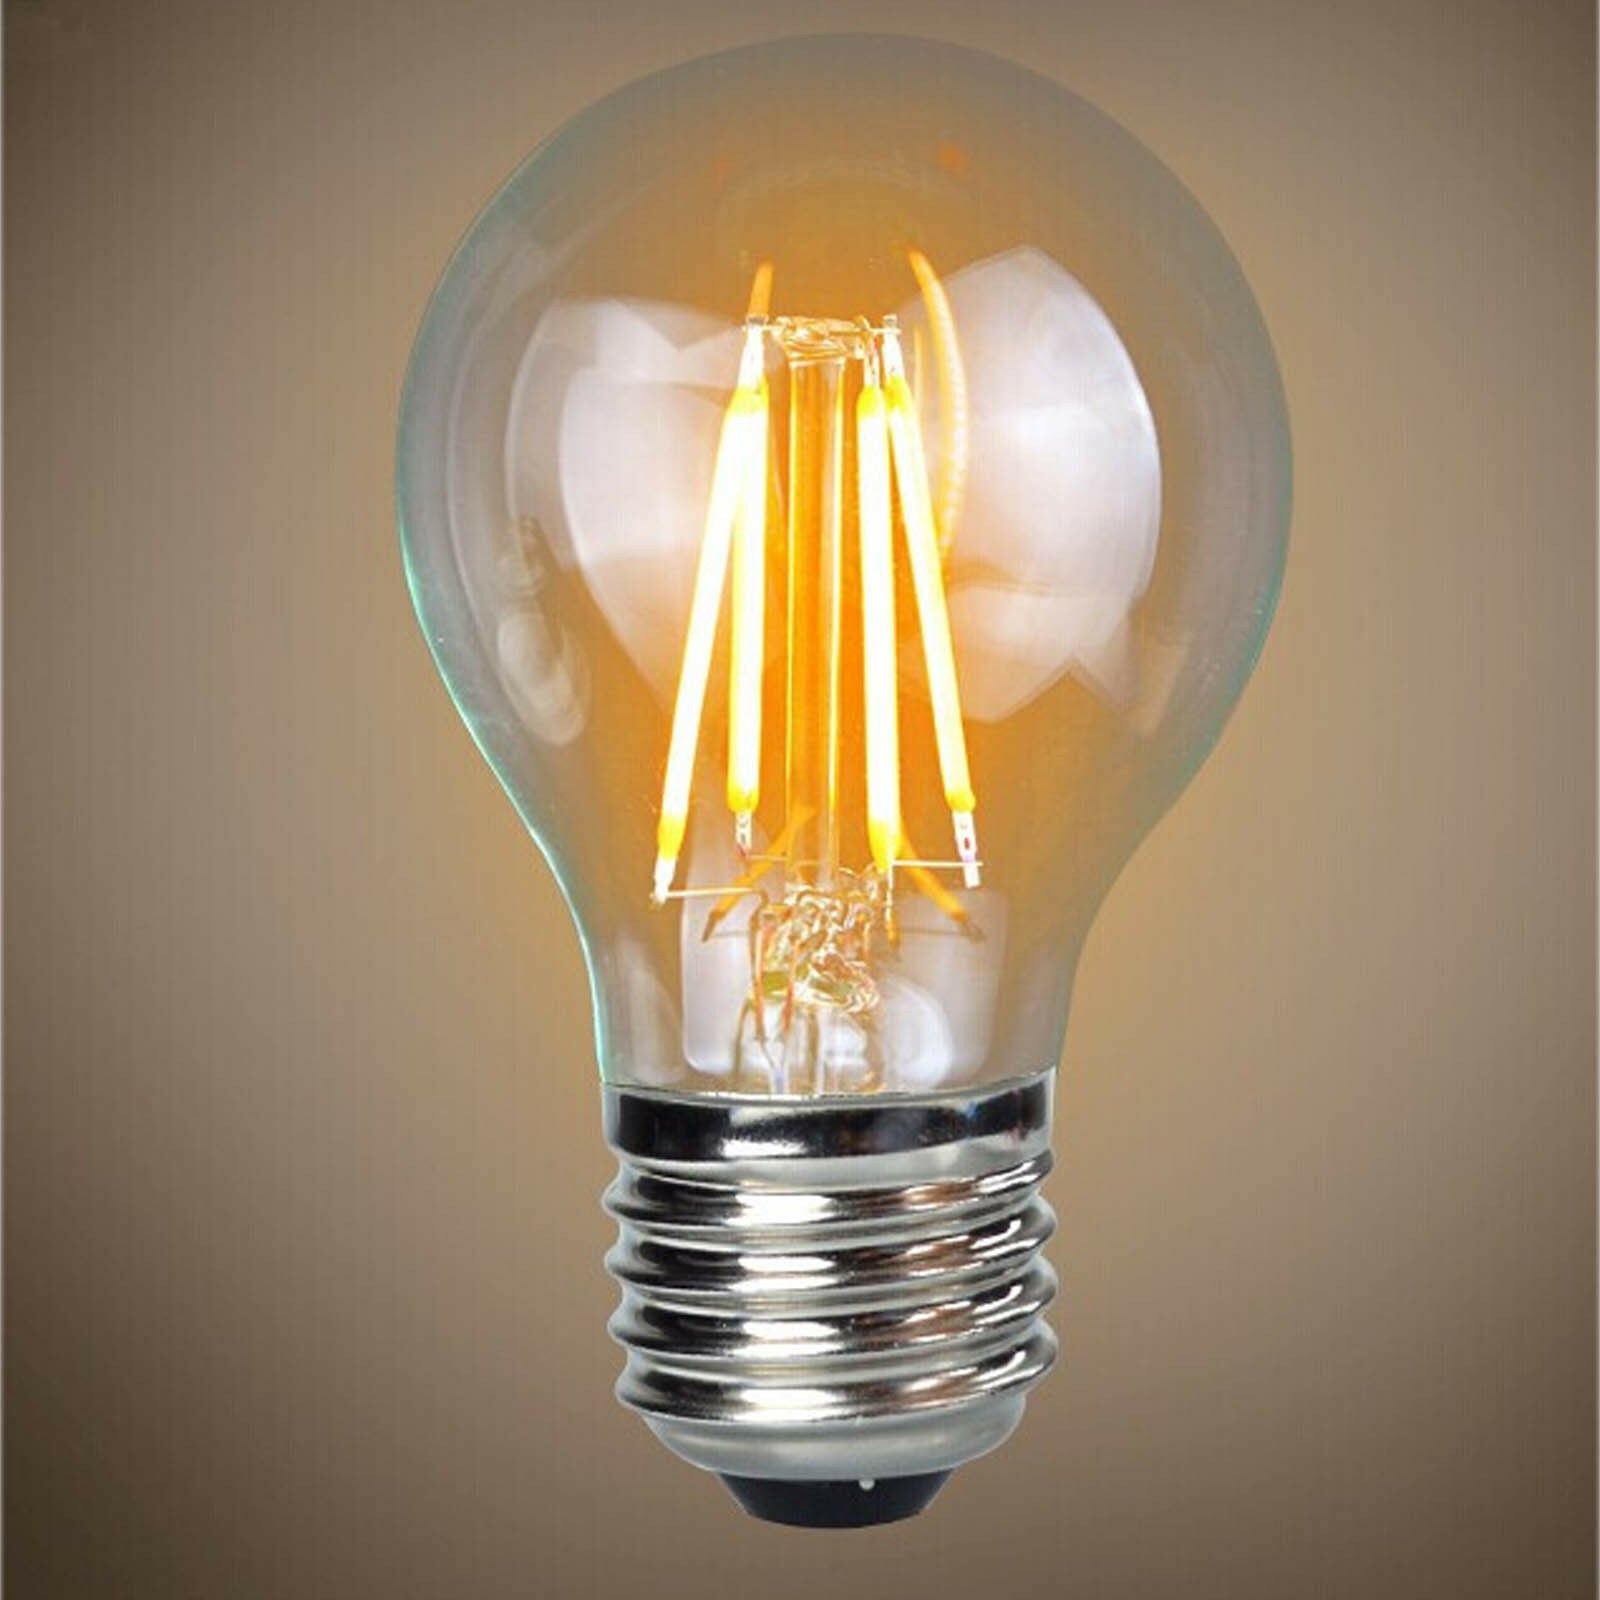 A60 E27 4W  Dimmable LED Vintage Classic Light Bulb - Shop for LED lights - Transformers - Lampshades - Holders | LEDSone UK